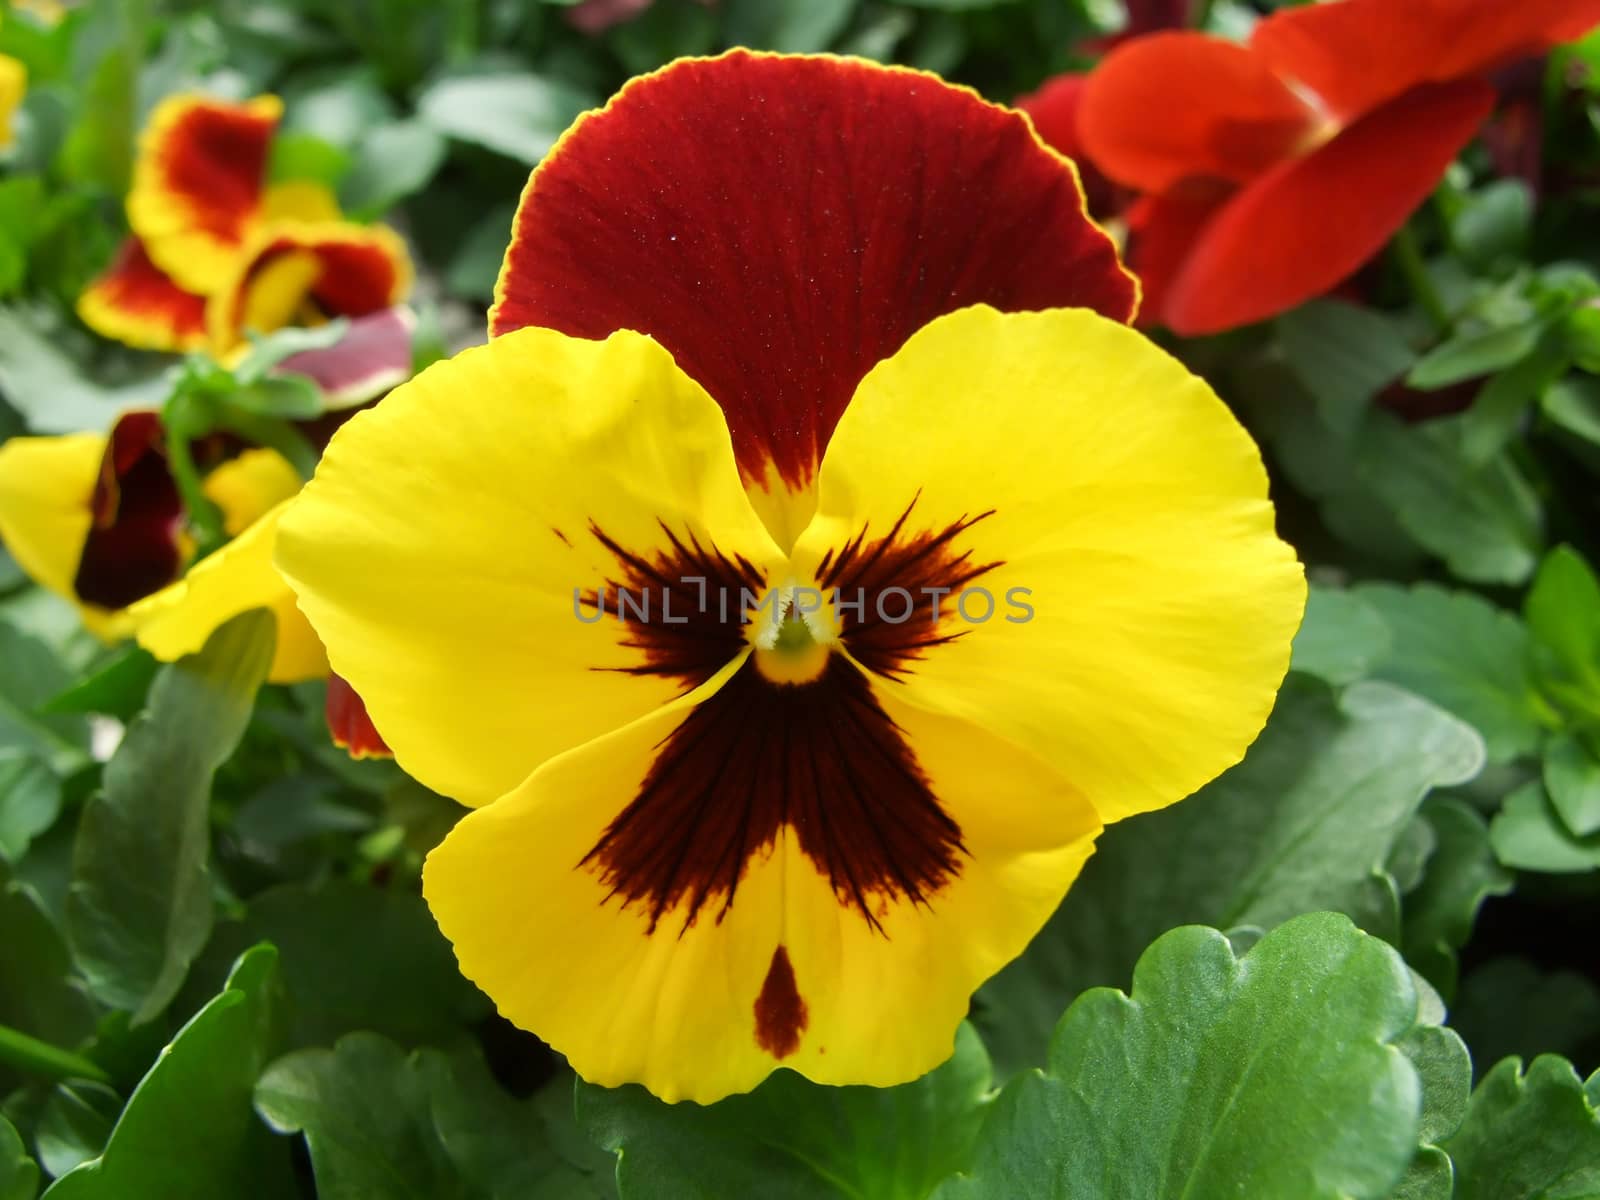 Yellow and Black Flower Pansies closeup of colorful pansy flower, pot plant.